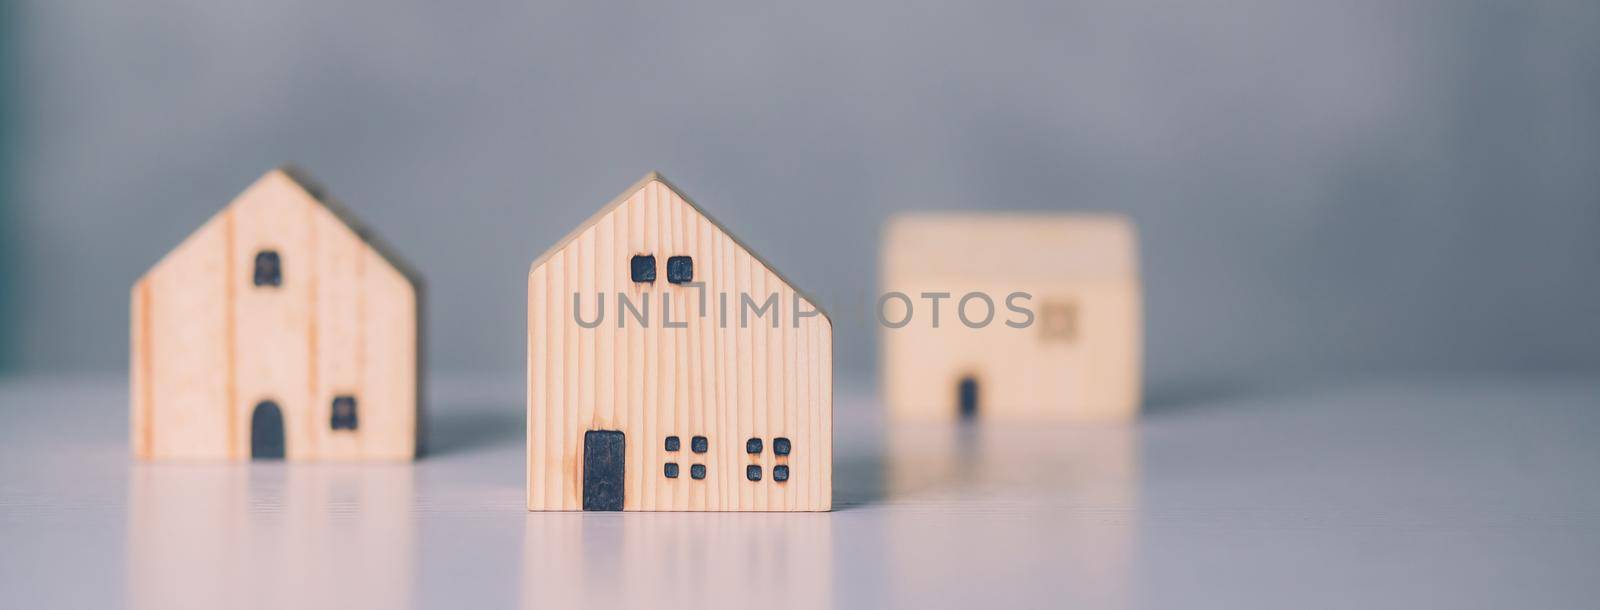 Mini wooden home model concept, investment of real estate and asset, tax of property and rental for finance, no people, small house and inspiration, mortgage and loan for residence, business concept. by nnudoo